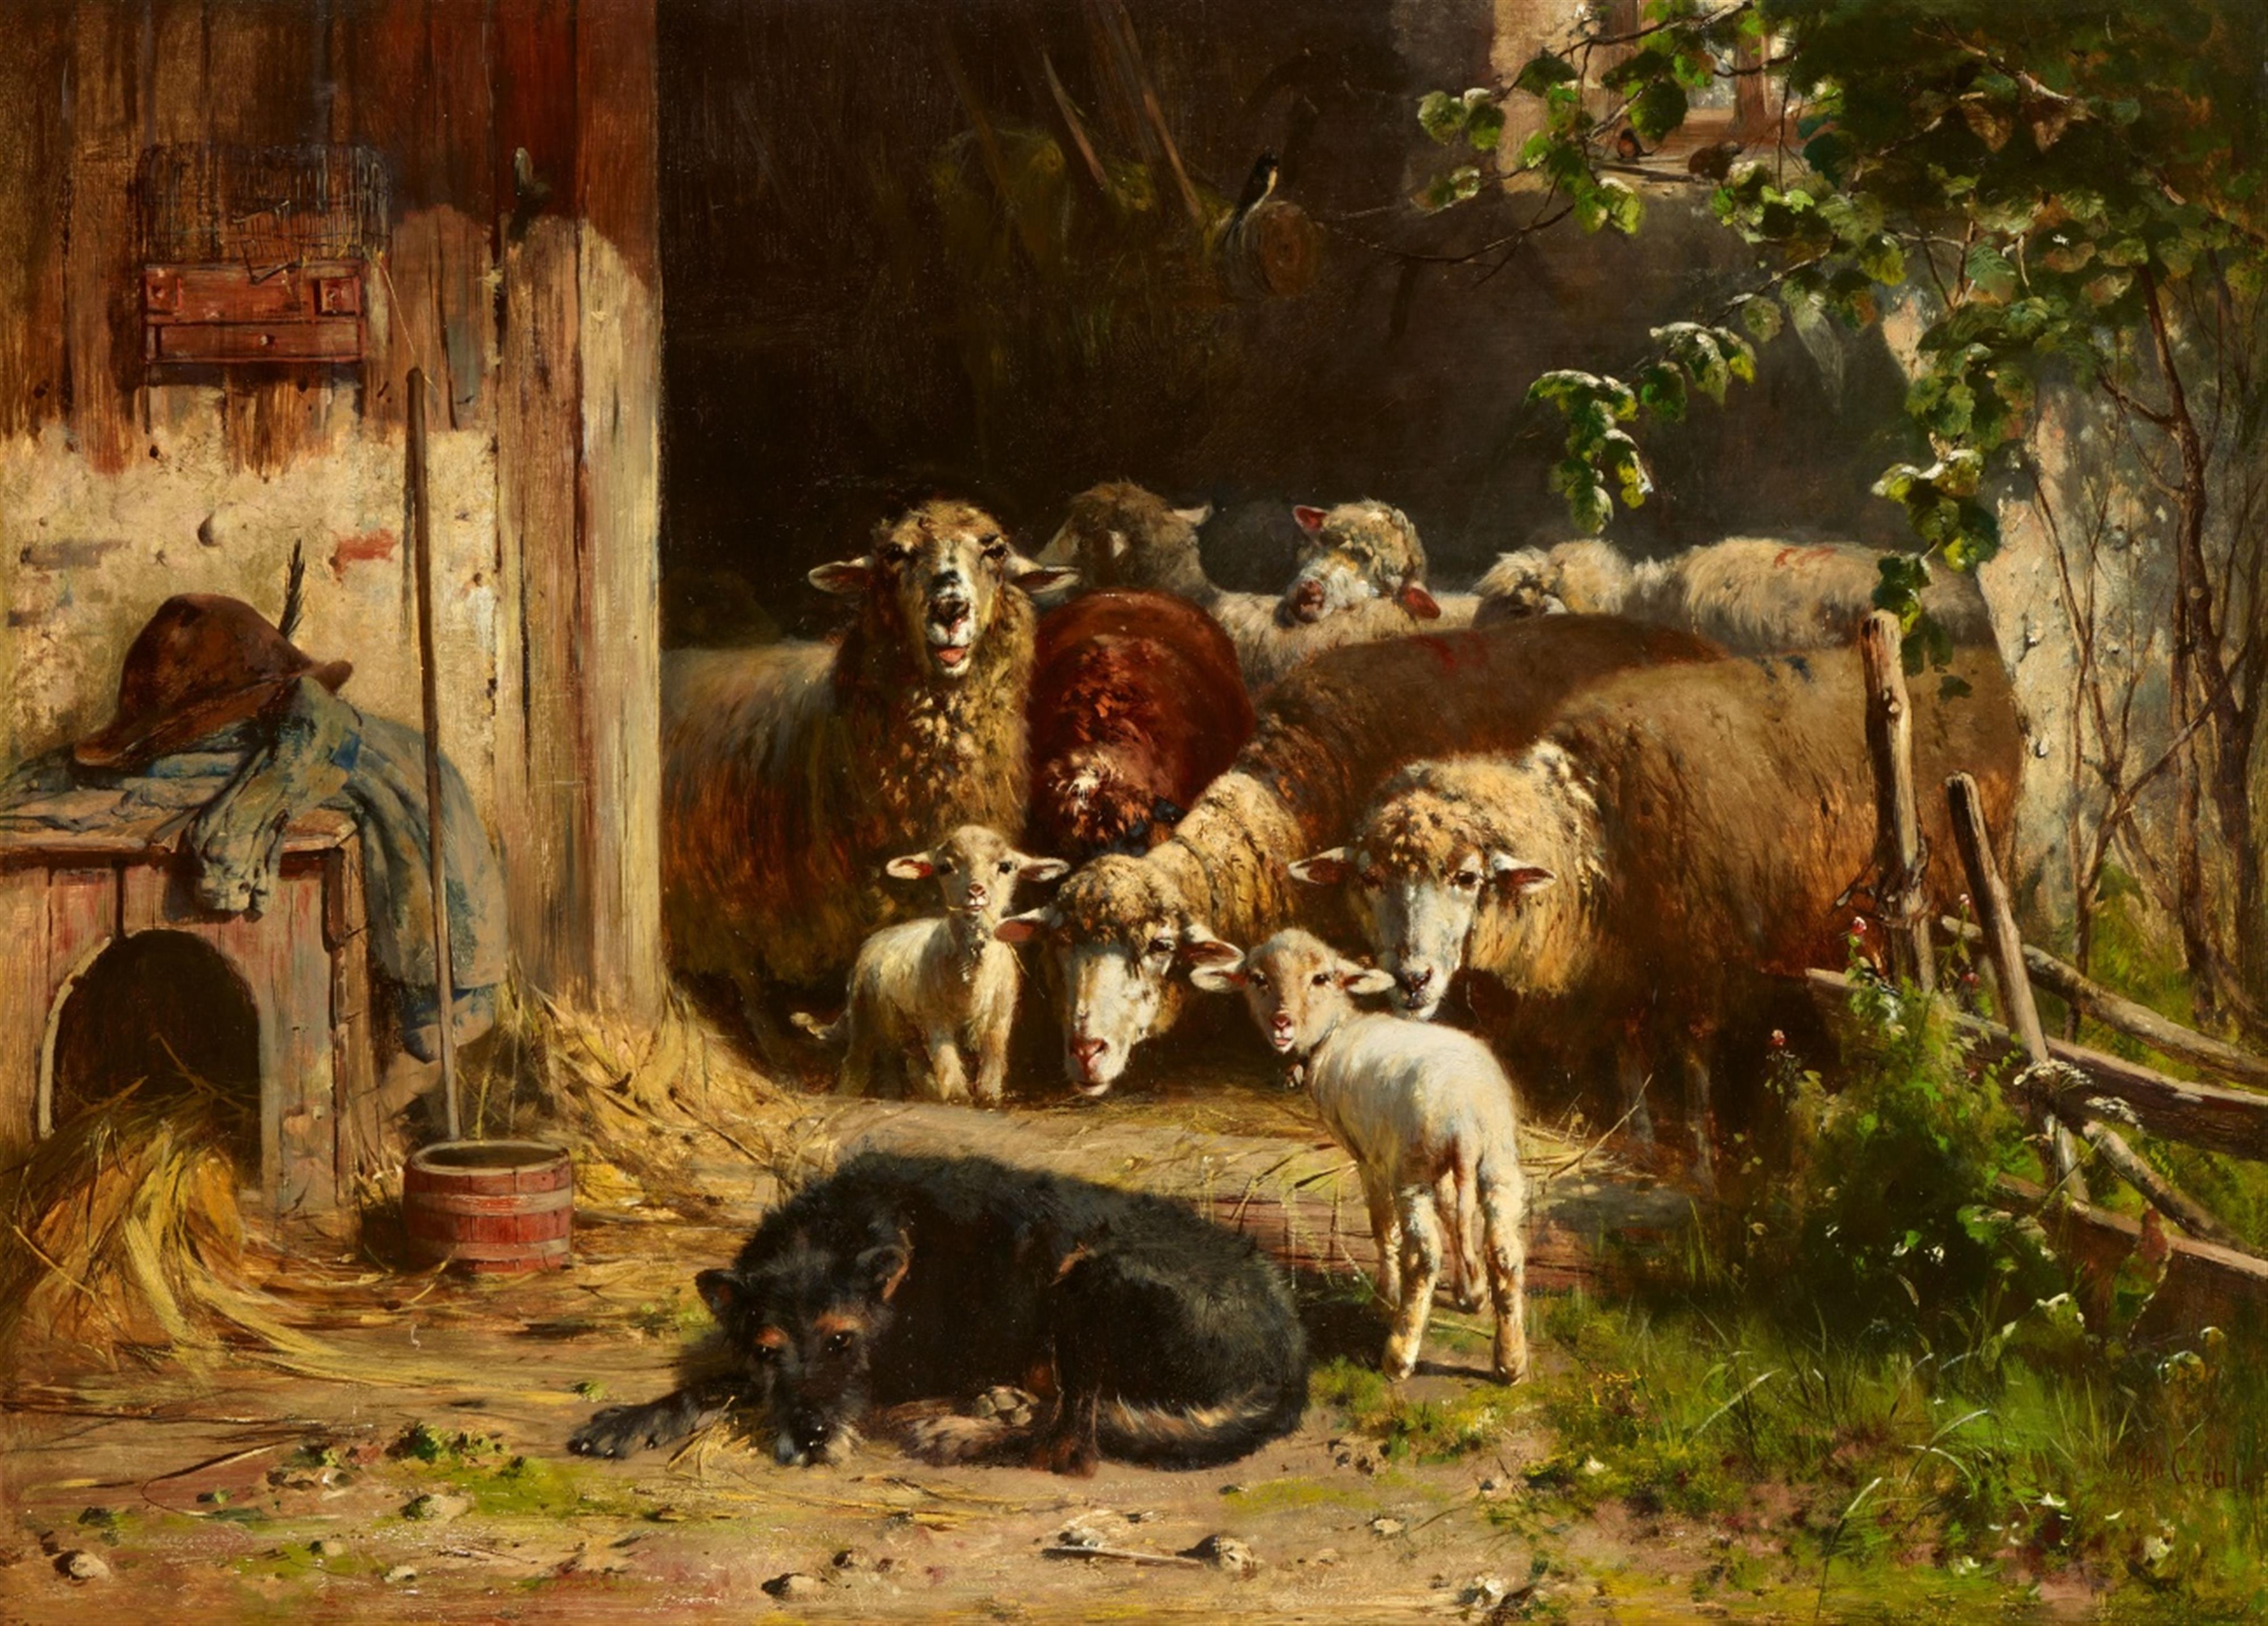 Otto Friedrich Gebler - Sheep and a Dog in a Stable - image-1